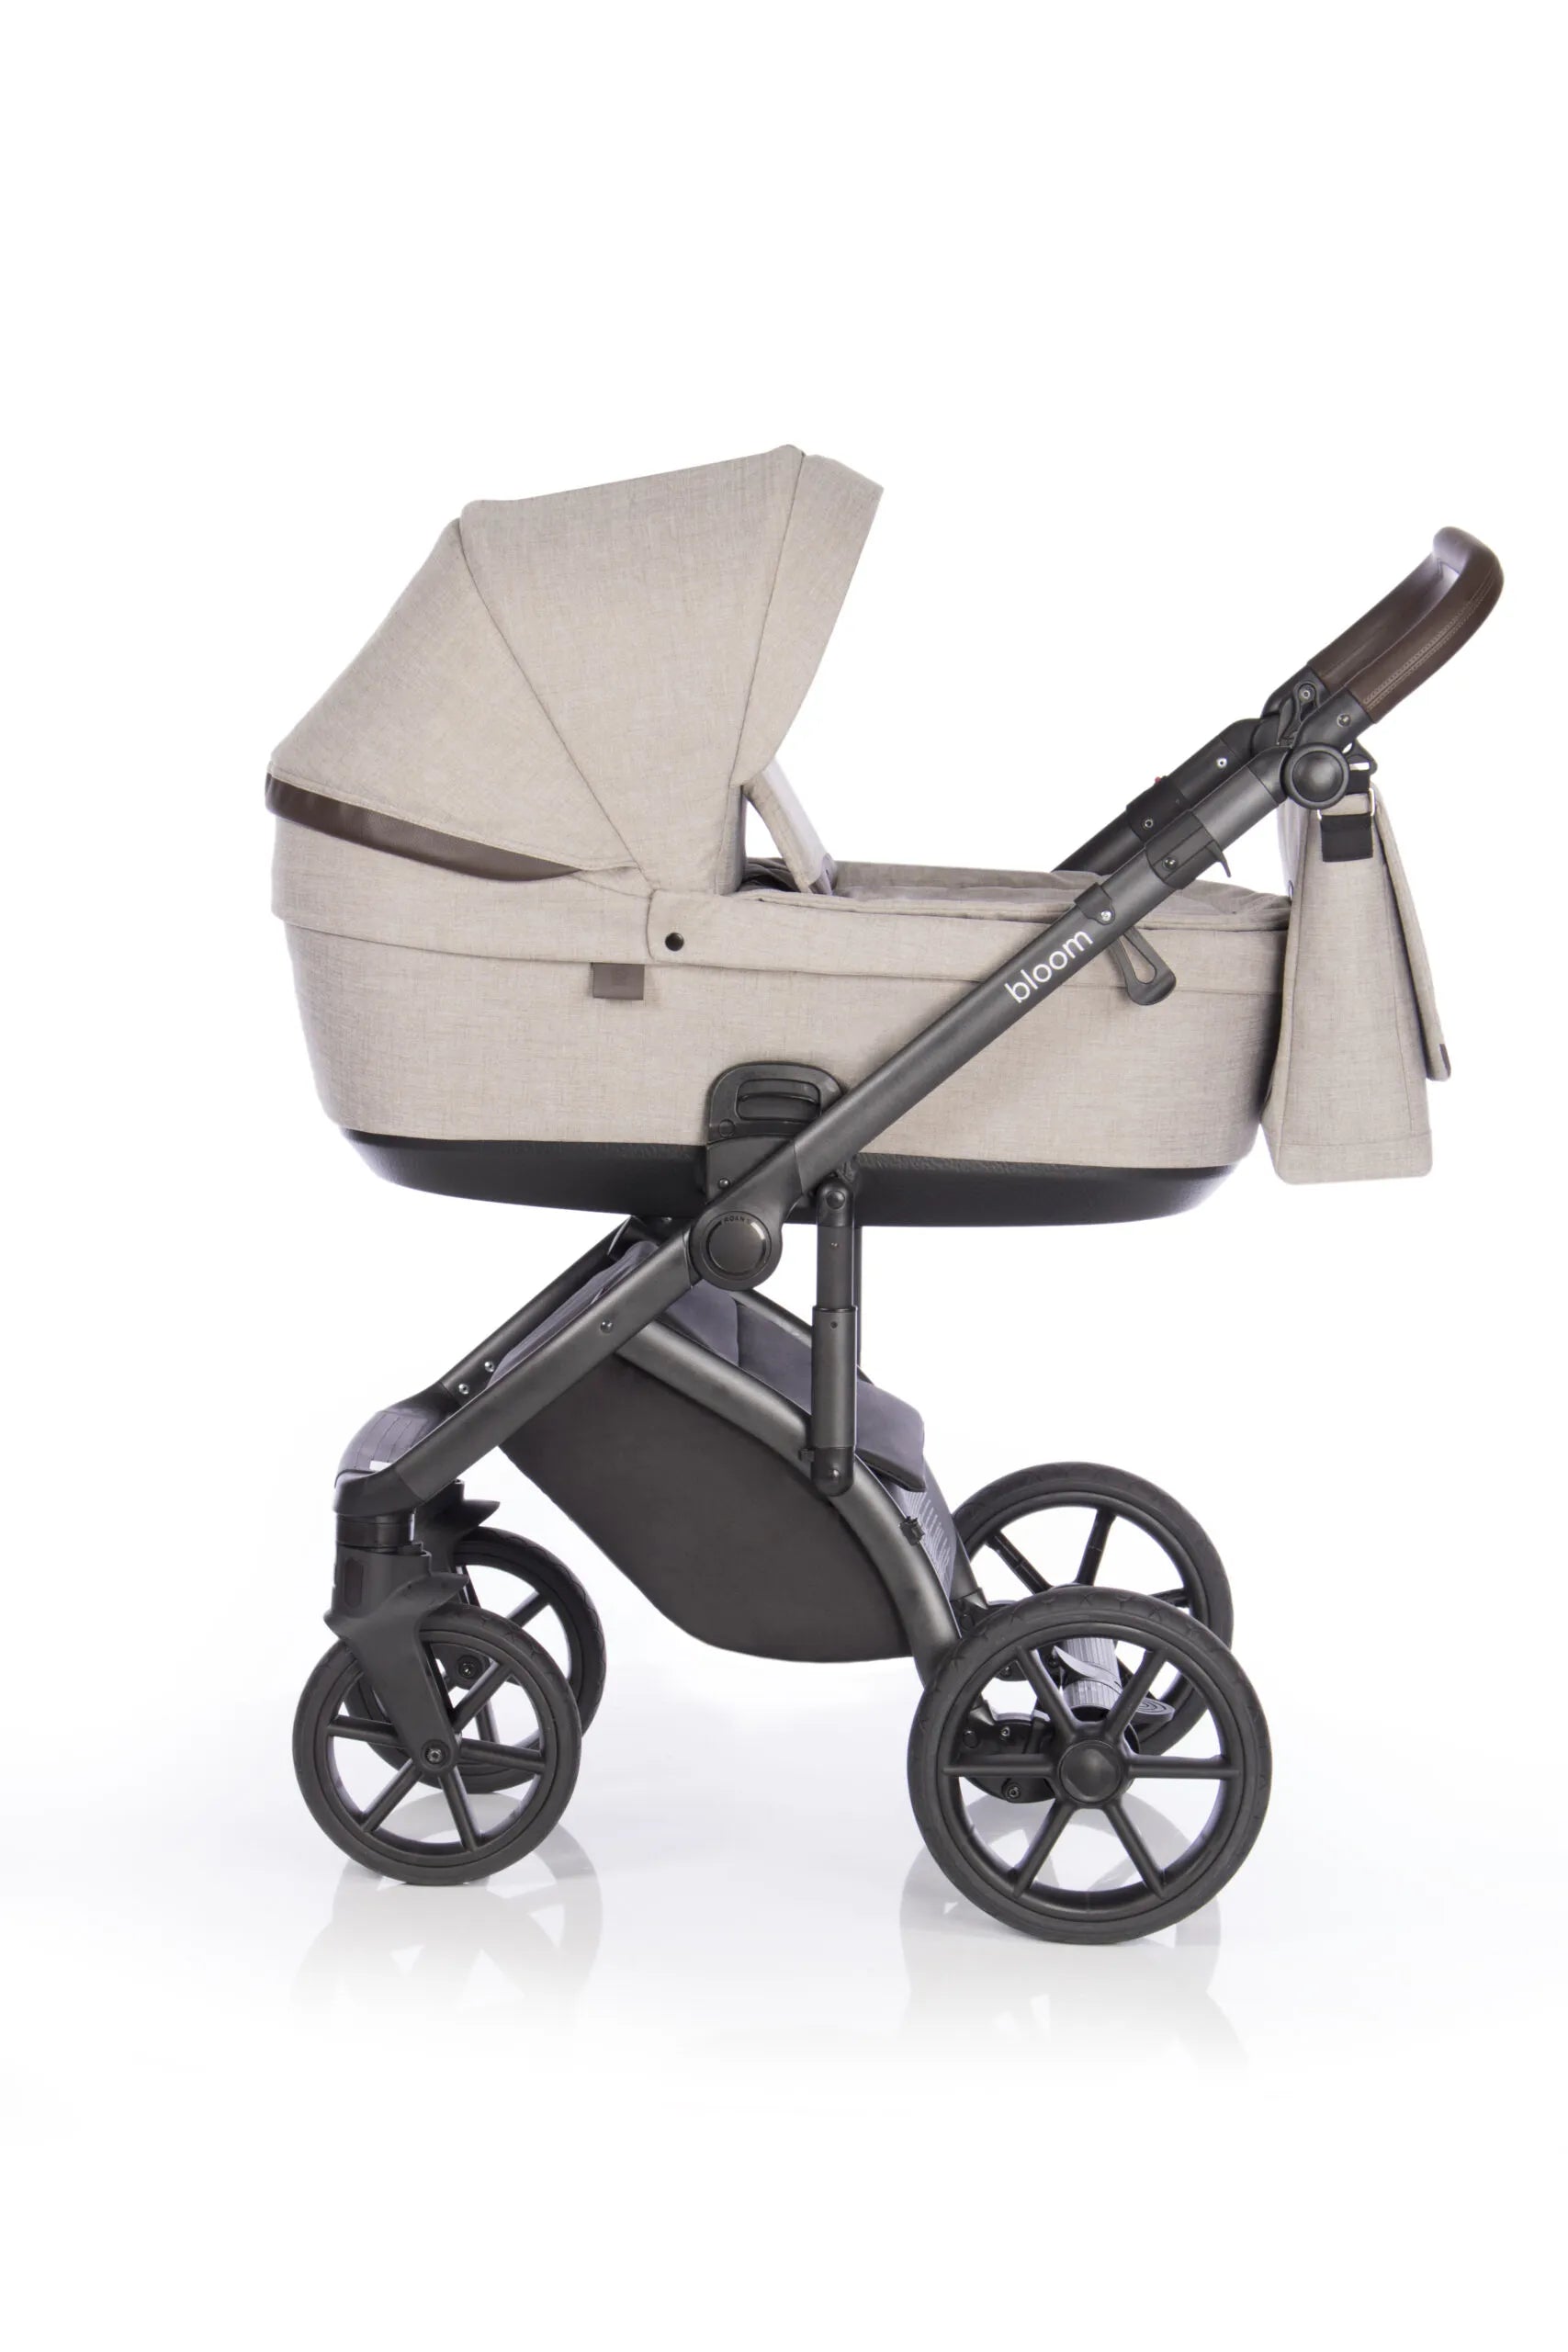 Roan BLOOM baby stroller 2 in 1, carry cot and stroller, color Truffle